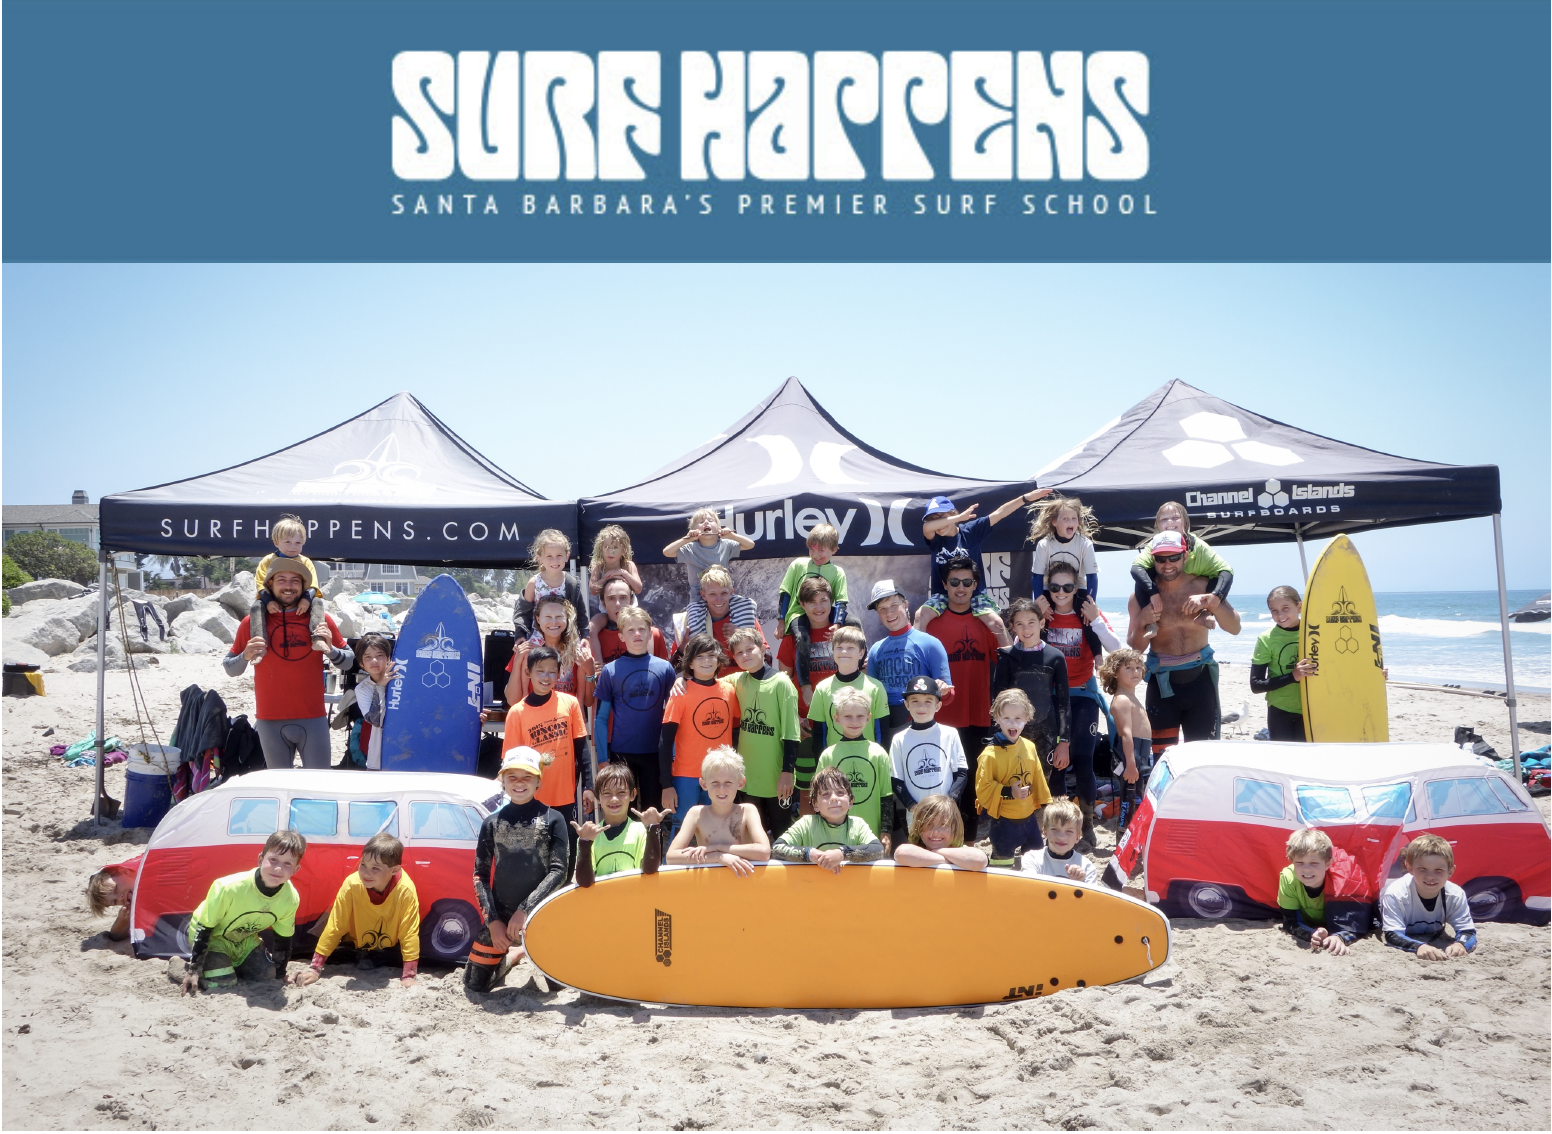 1 Day of Surf Happens Camp, Surf Happens hat, and WetChute Image